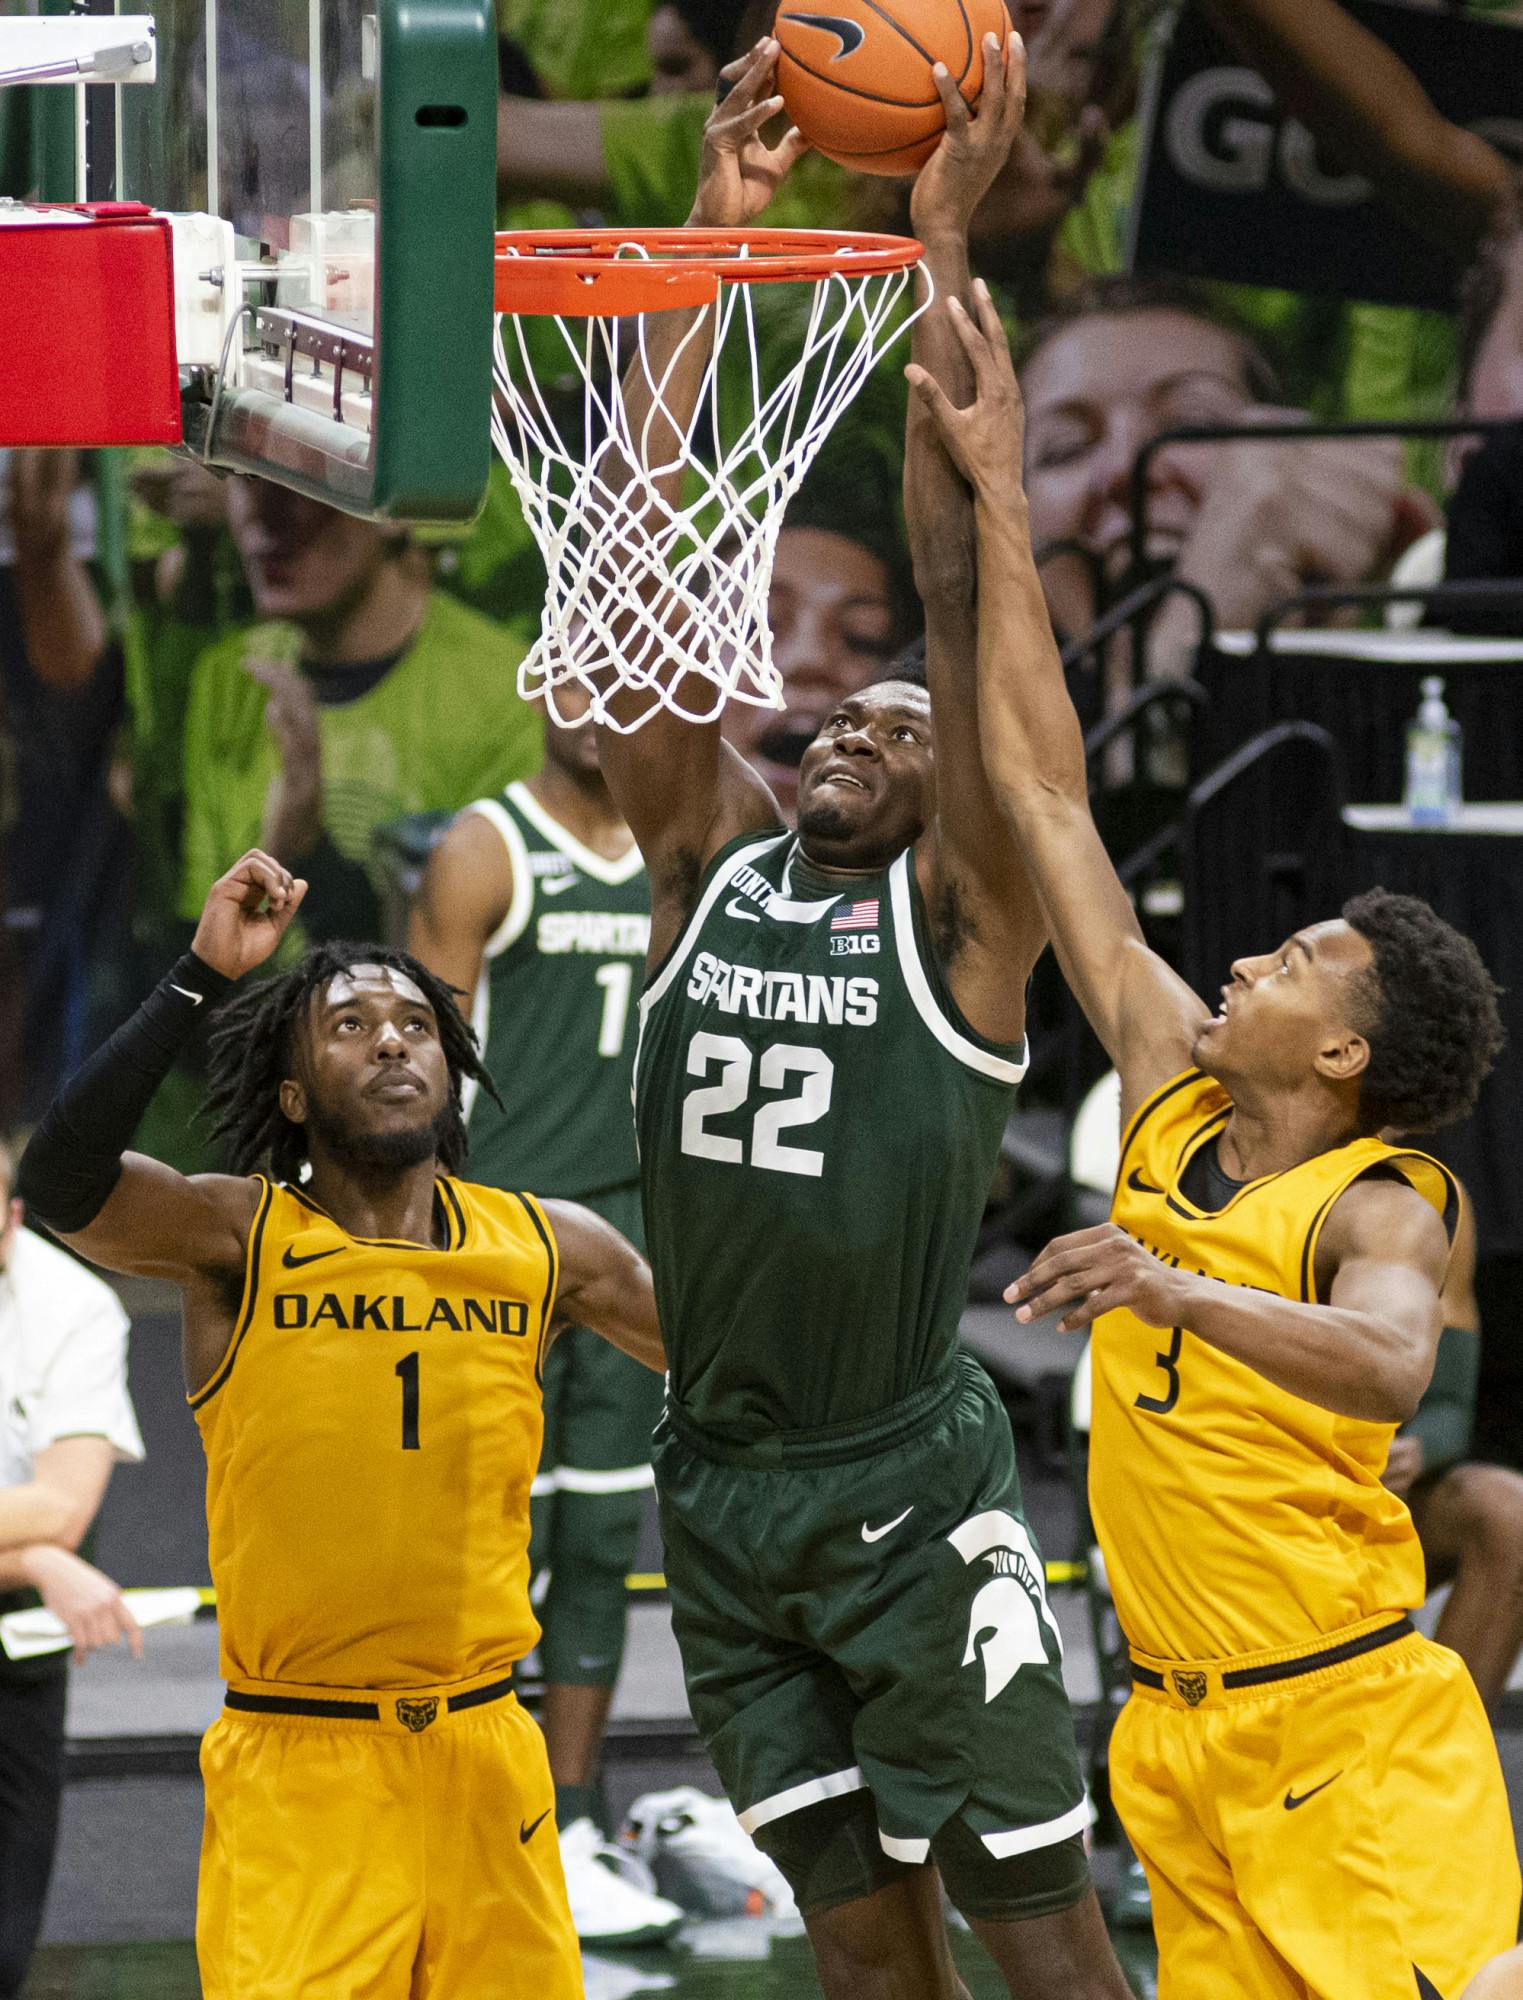 <p>Then-freshman center Mady Sissoko (22) attempts to dunk on the Oakland net during the second half, but is unsuccessful. The Spartans came back after the first half to pull out a 109-91 win on Dec. 13, 2020.</p>